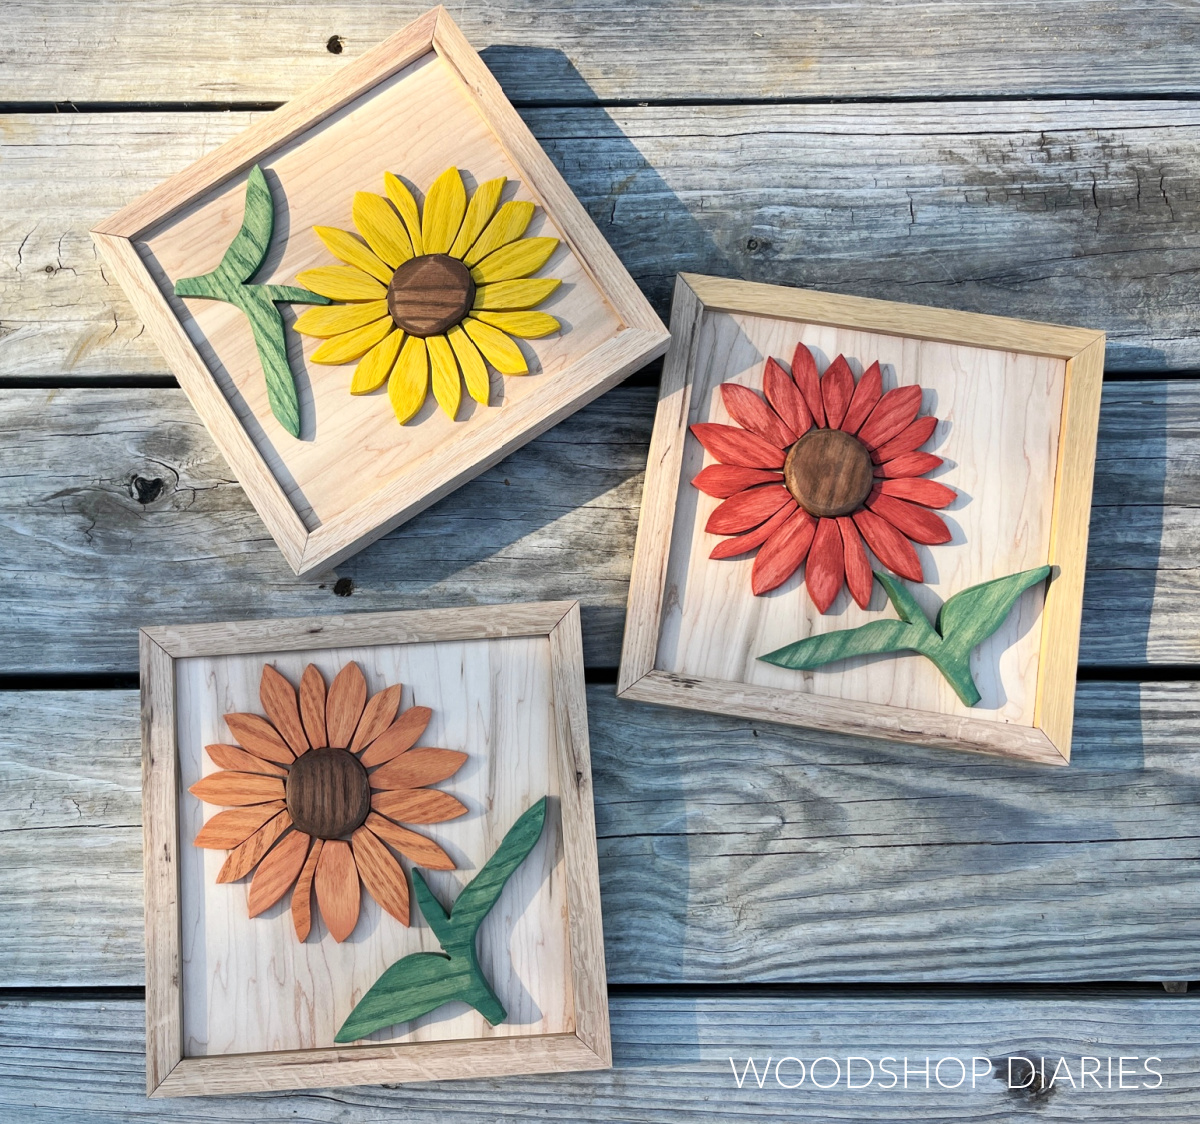 Three wooden sunflower art pieces against weathered wood backdrop--one yellow, one red, one orange flower